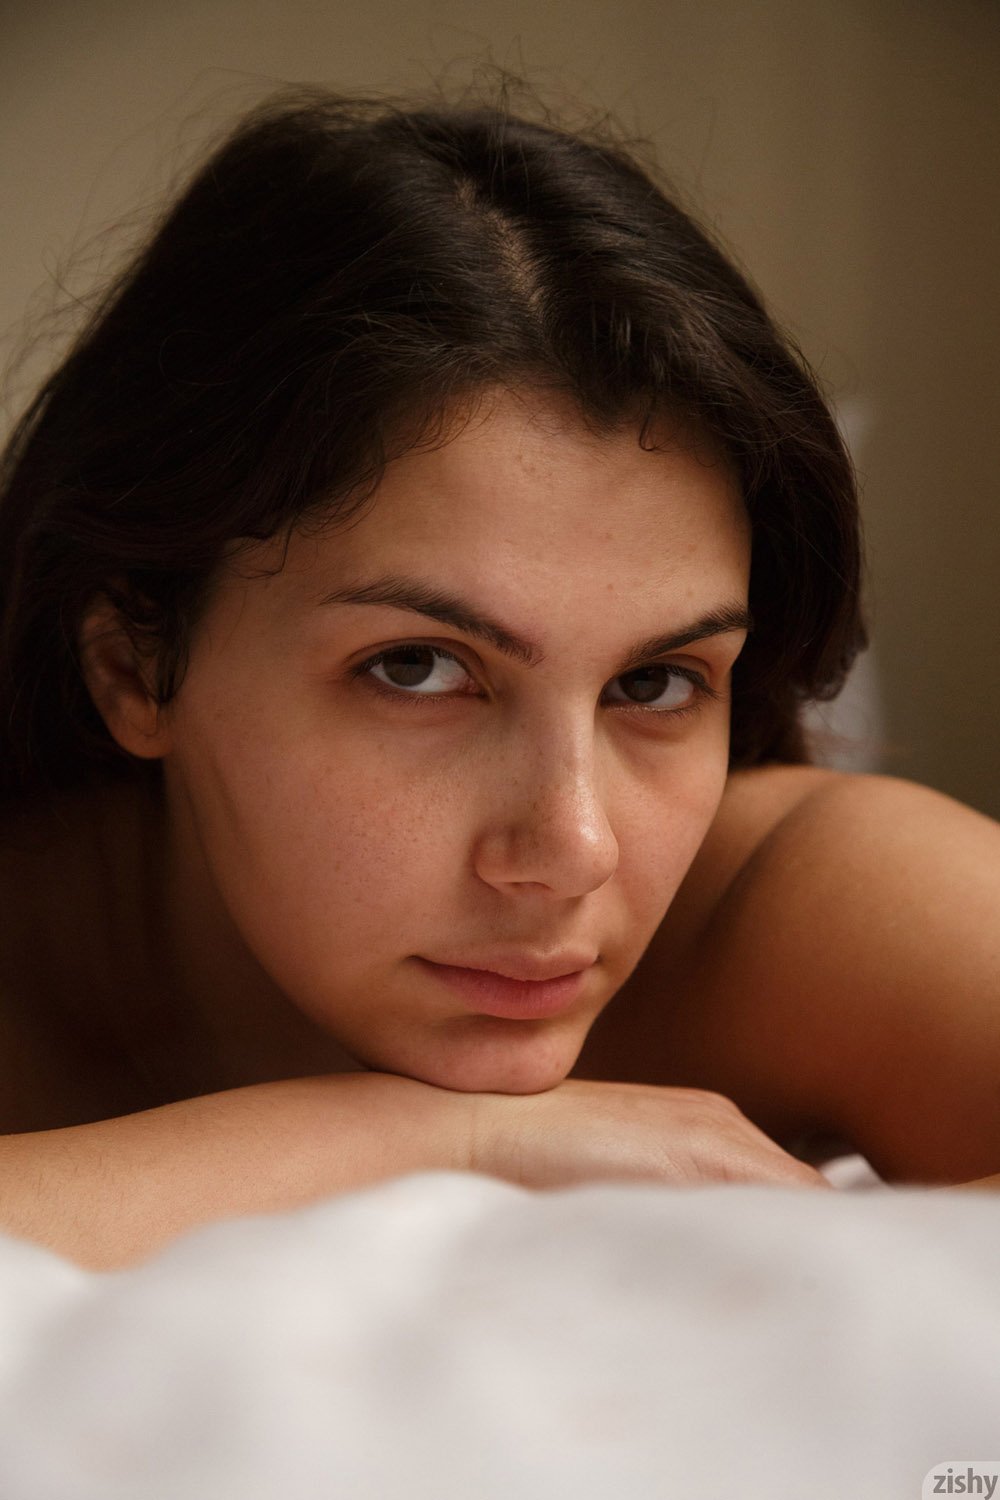 Beautiful Girl Valentina Nappi Posing Naked On Bed Free Porn Pics And Sex Videos